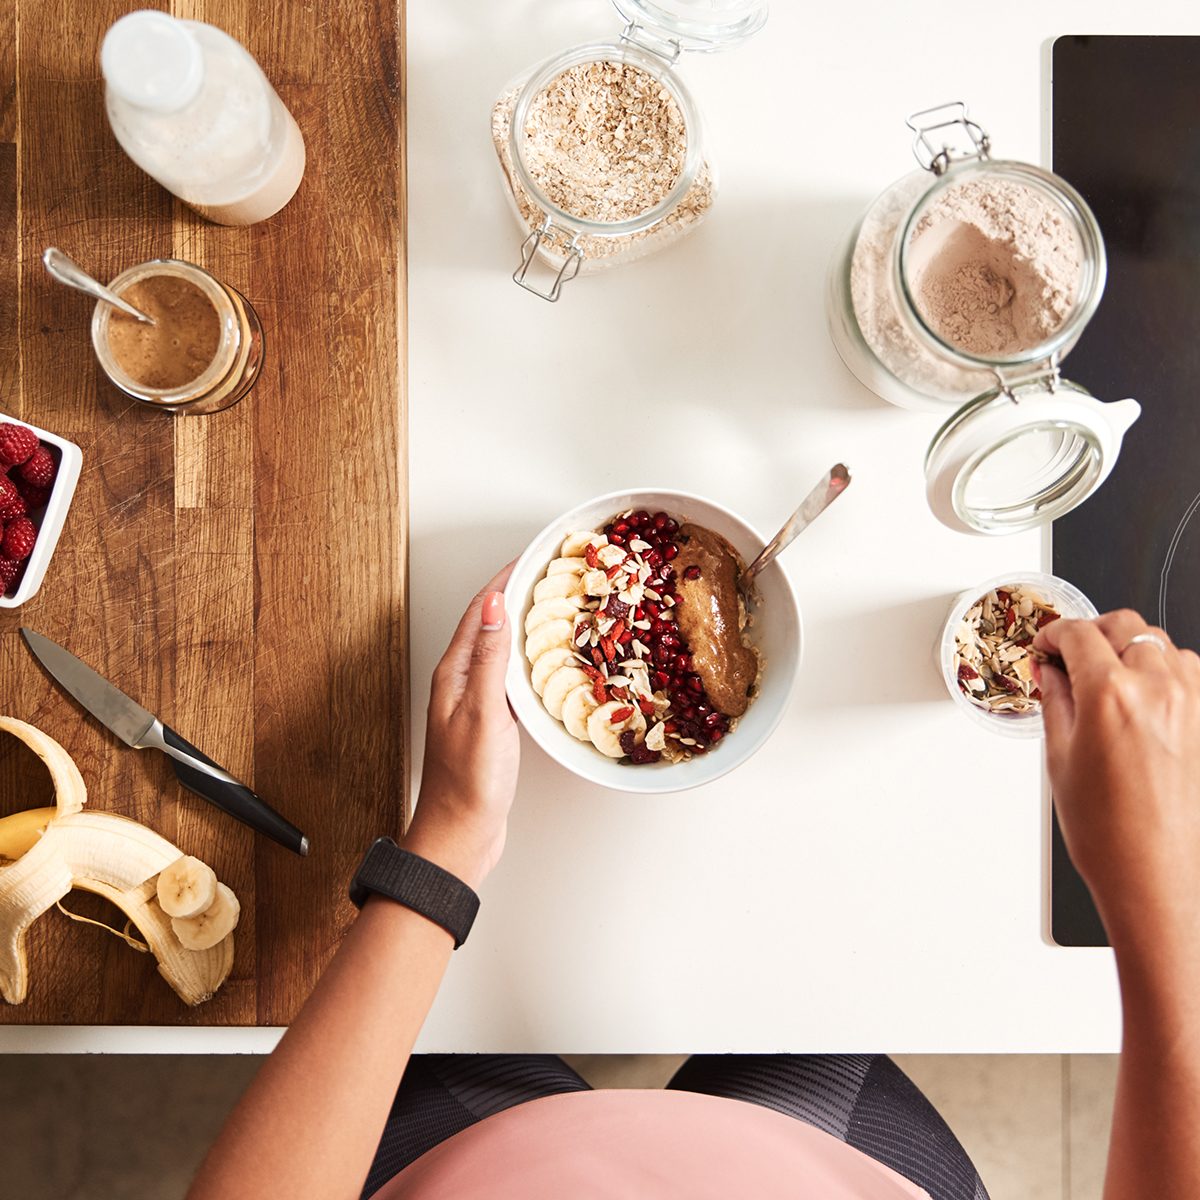 Overhead Shot Of Woman Preparing Healthy Breakfast At Home After Exercise